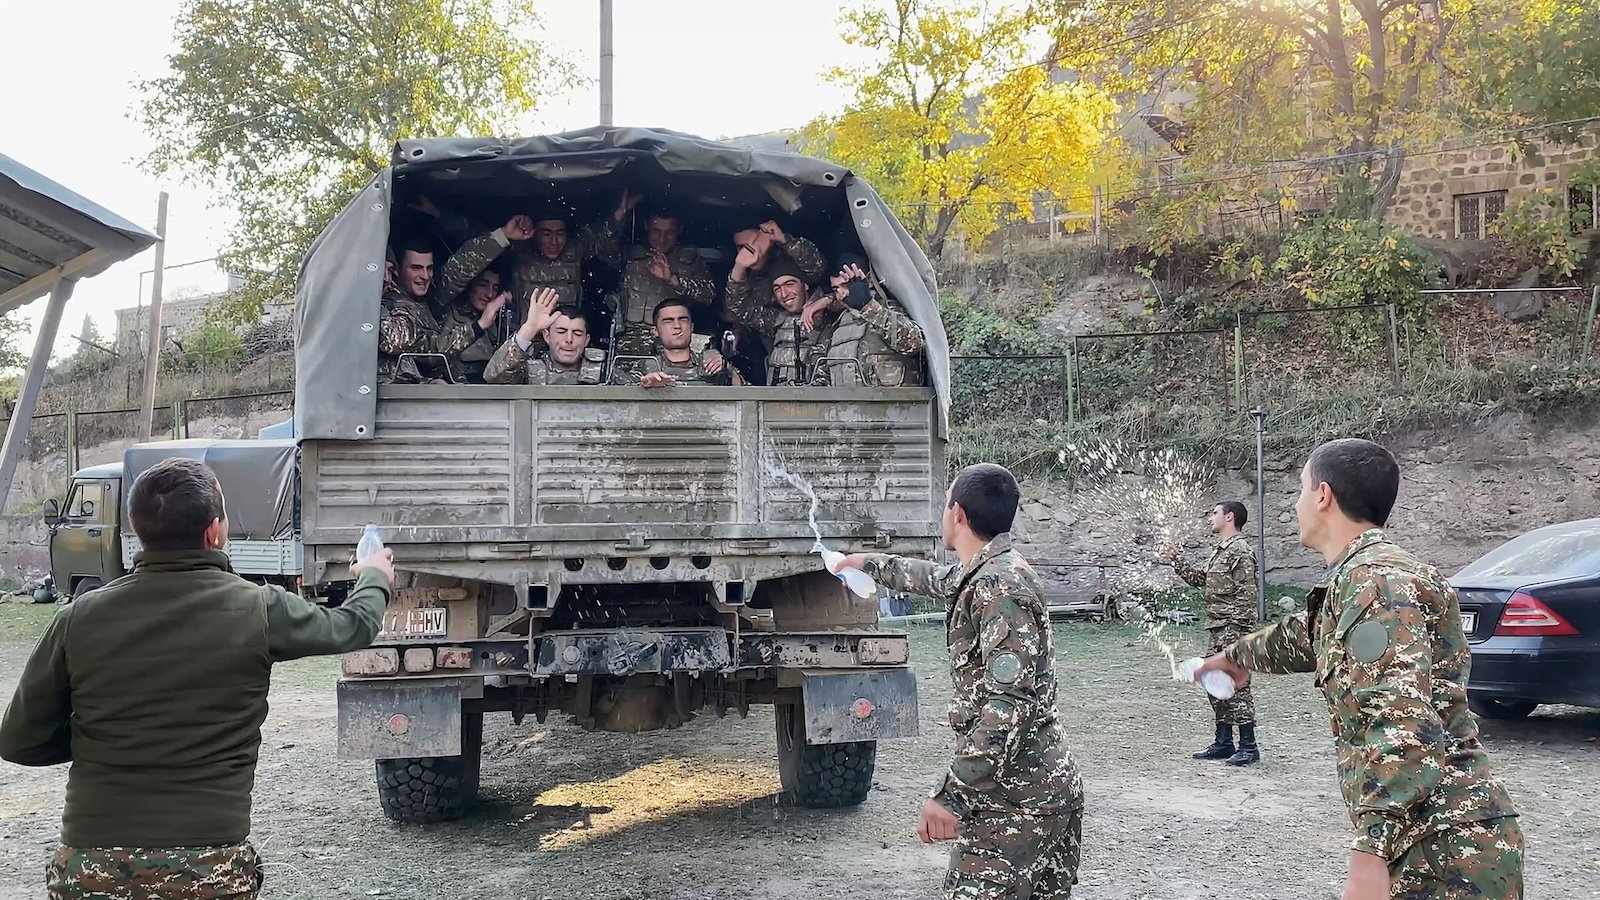 A truck full of soldiers drives away, while men dressed in fatigues wave from the back of the truck as four other men say goodbye to them by splashing bottled water at them.